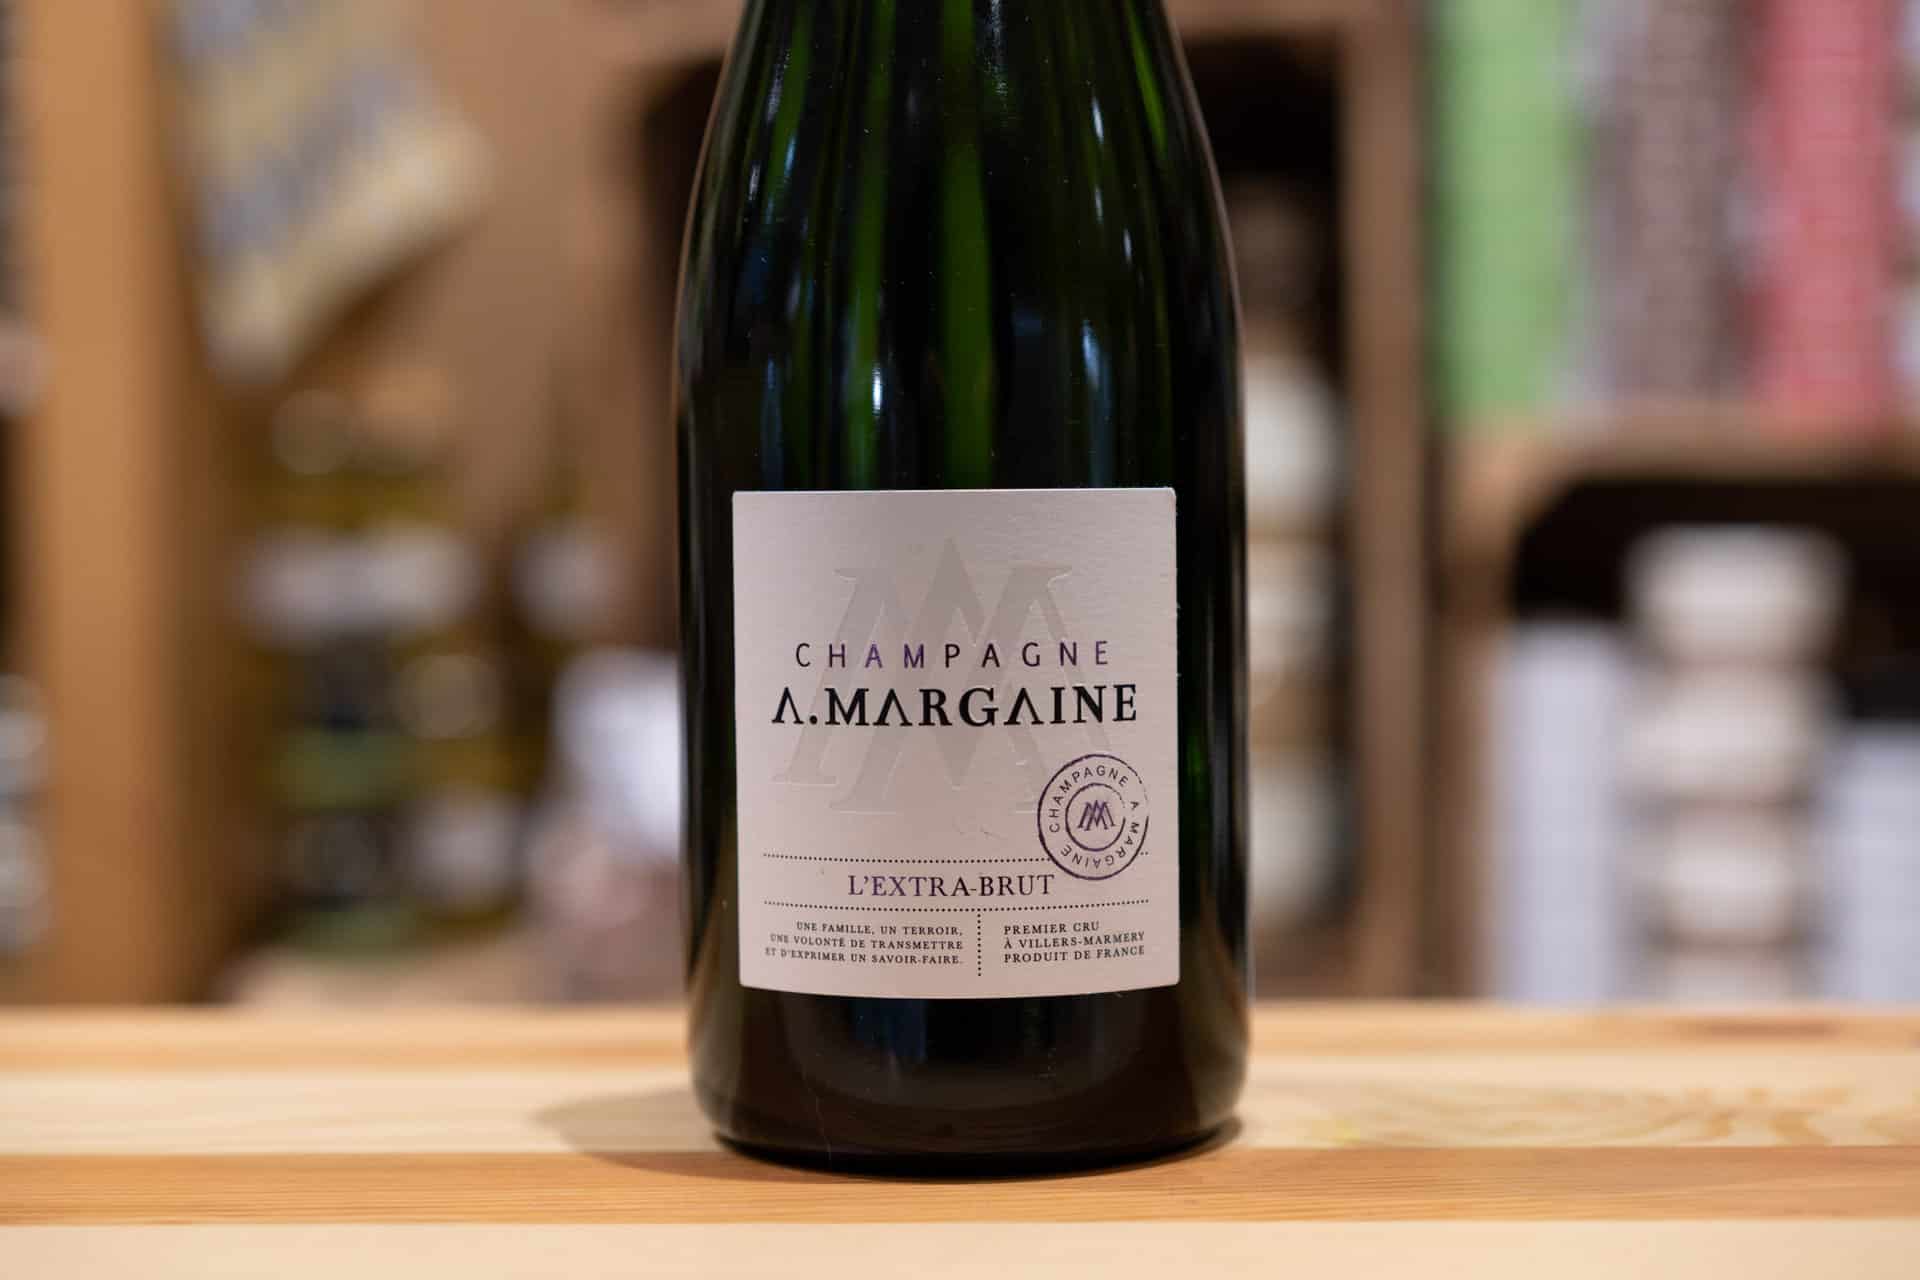 Champagne "Le Brut" A. Margaine